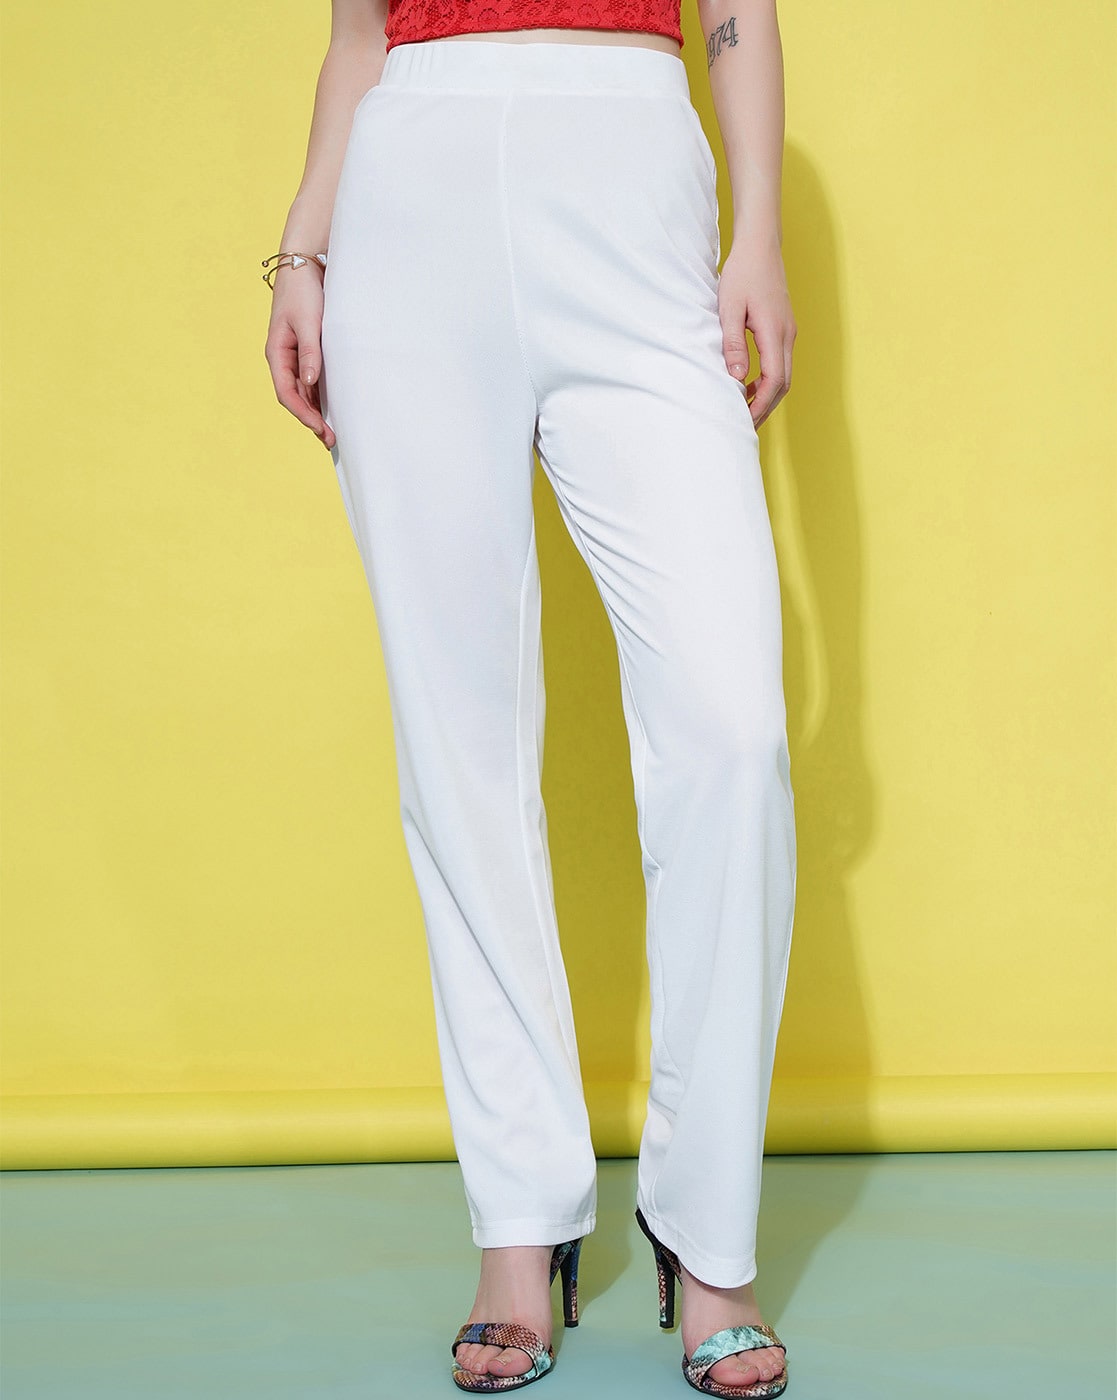 White Trousers Are The 2023 Summer Trend We Can't Stop Thinking About